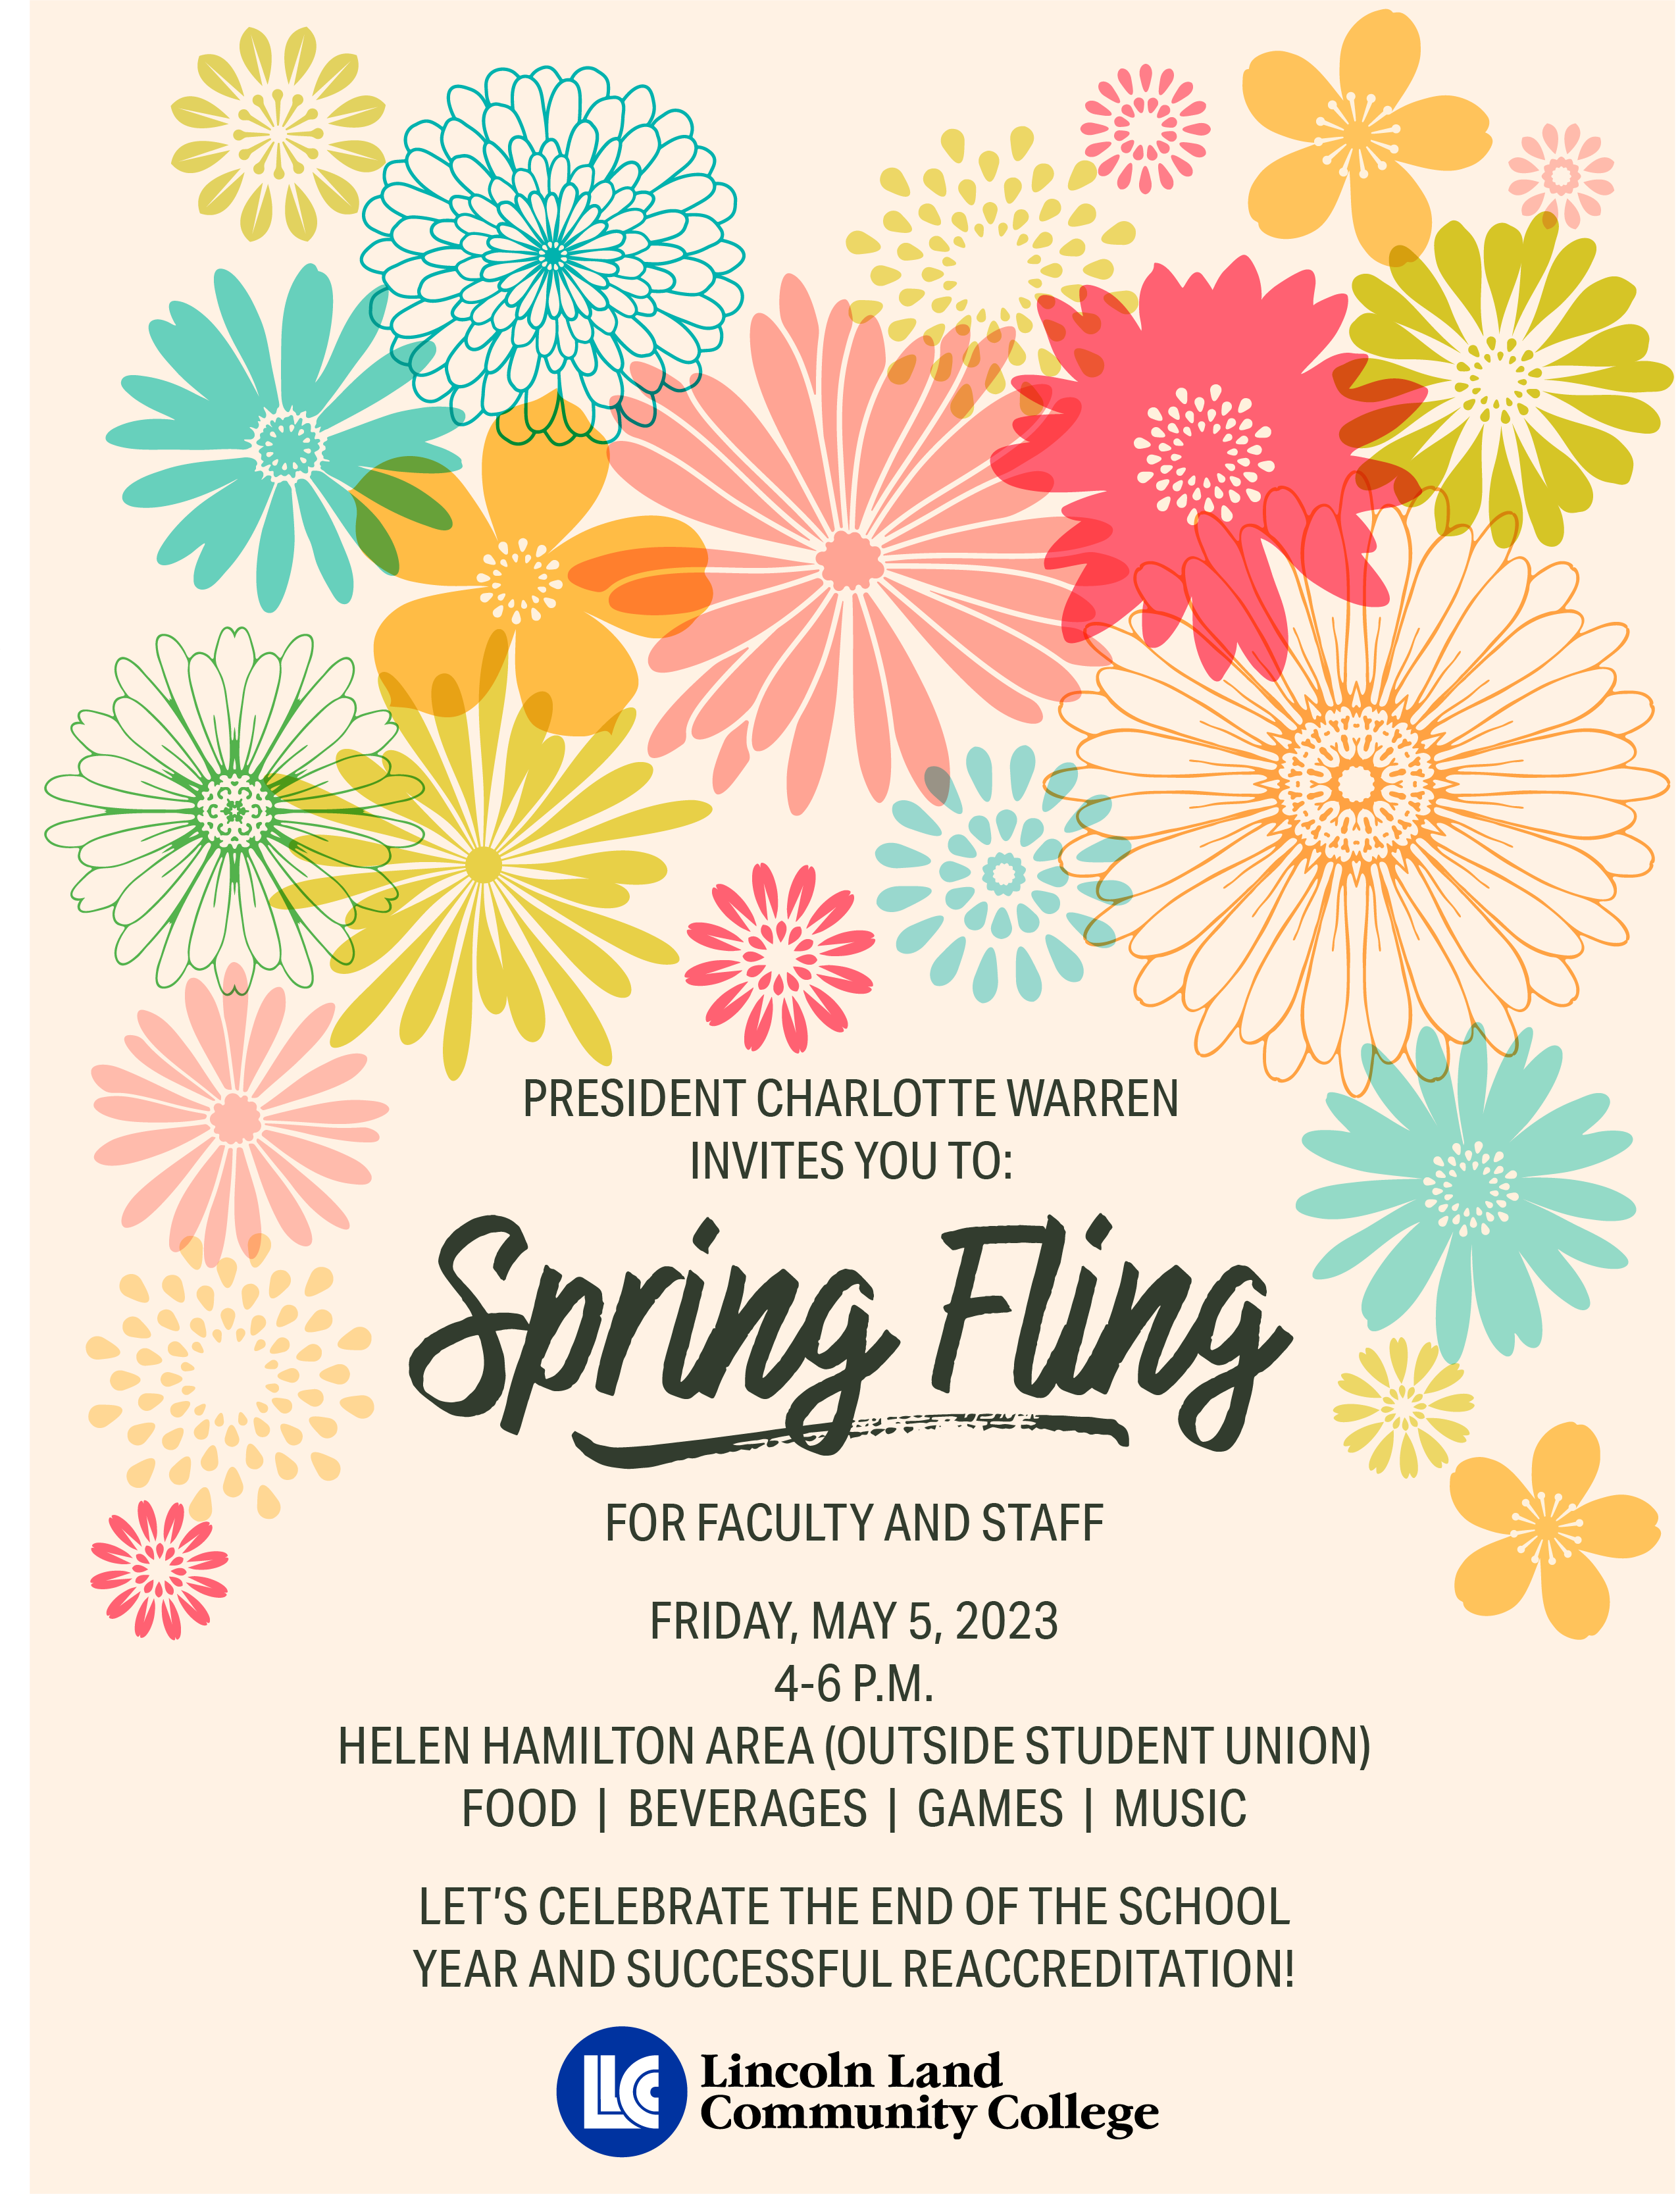 President Charlotte Warren invites you to: Spring Fling for faculty and staff. Friday, May 5, 2023, 4-6 p.m. Helen Hamilton Area (outside Student Union). Food, beverages, games, music. Let's celebrate the end of the school year and successful reaccreditation! Lincoln Land Community College.